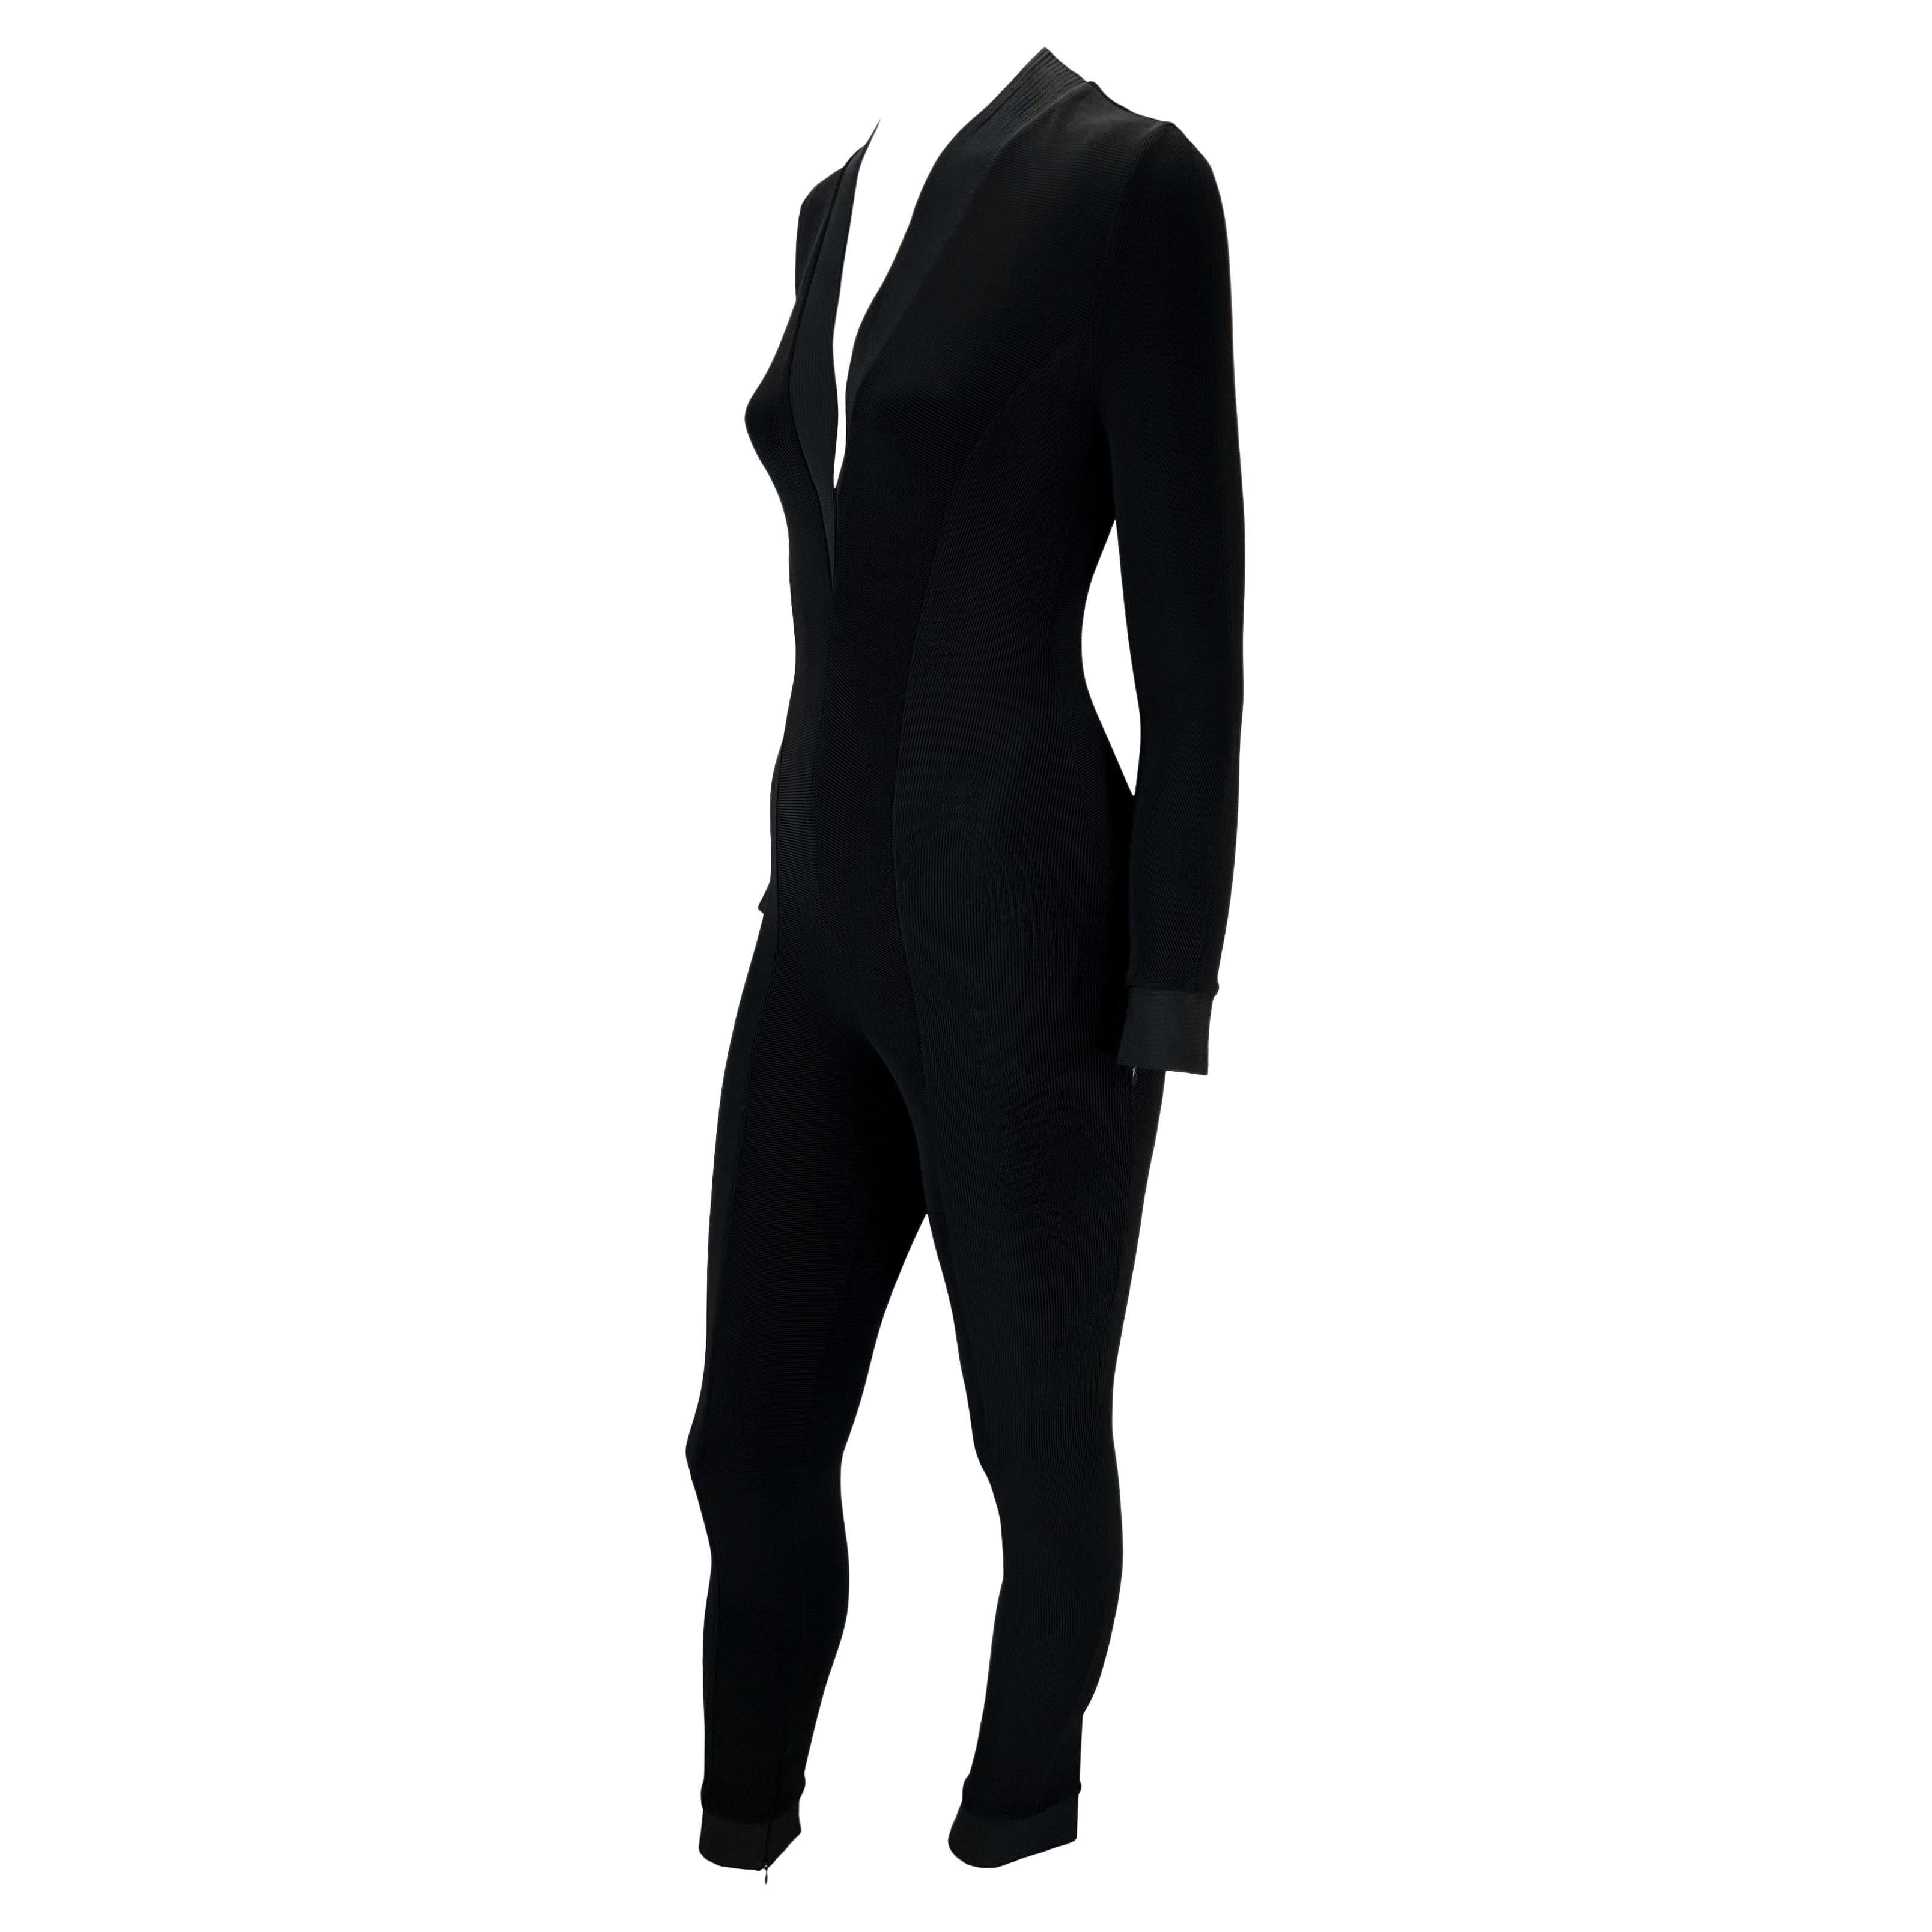 Presenting a gorgeous black ribbed Gianni Versace Couture catsuit, designed by Gianni Versace. From the Spring/Summer 1992 collection, this stunning catsuit features a plunging neckline, a stitched panel detail around the neckline, and full-length